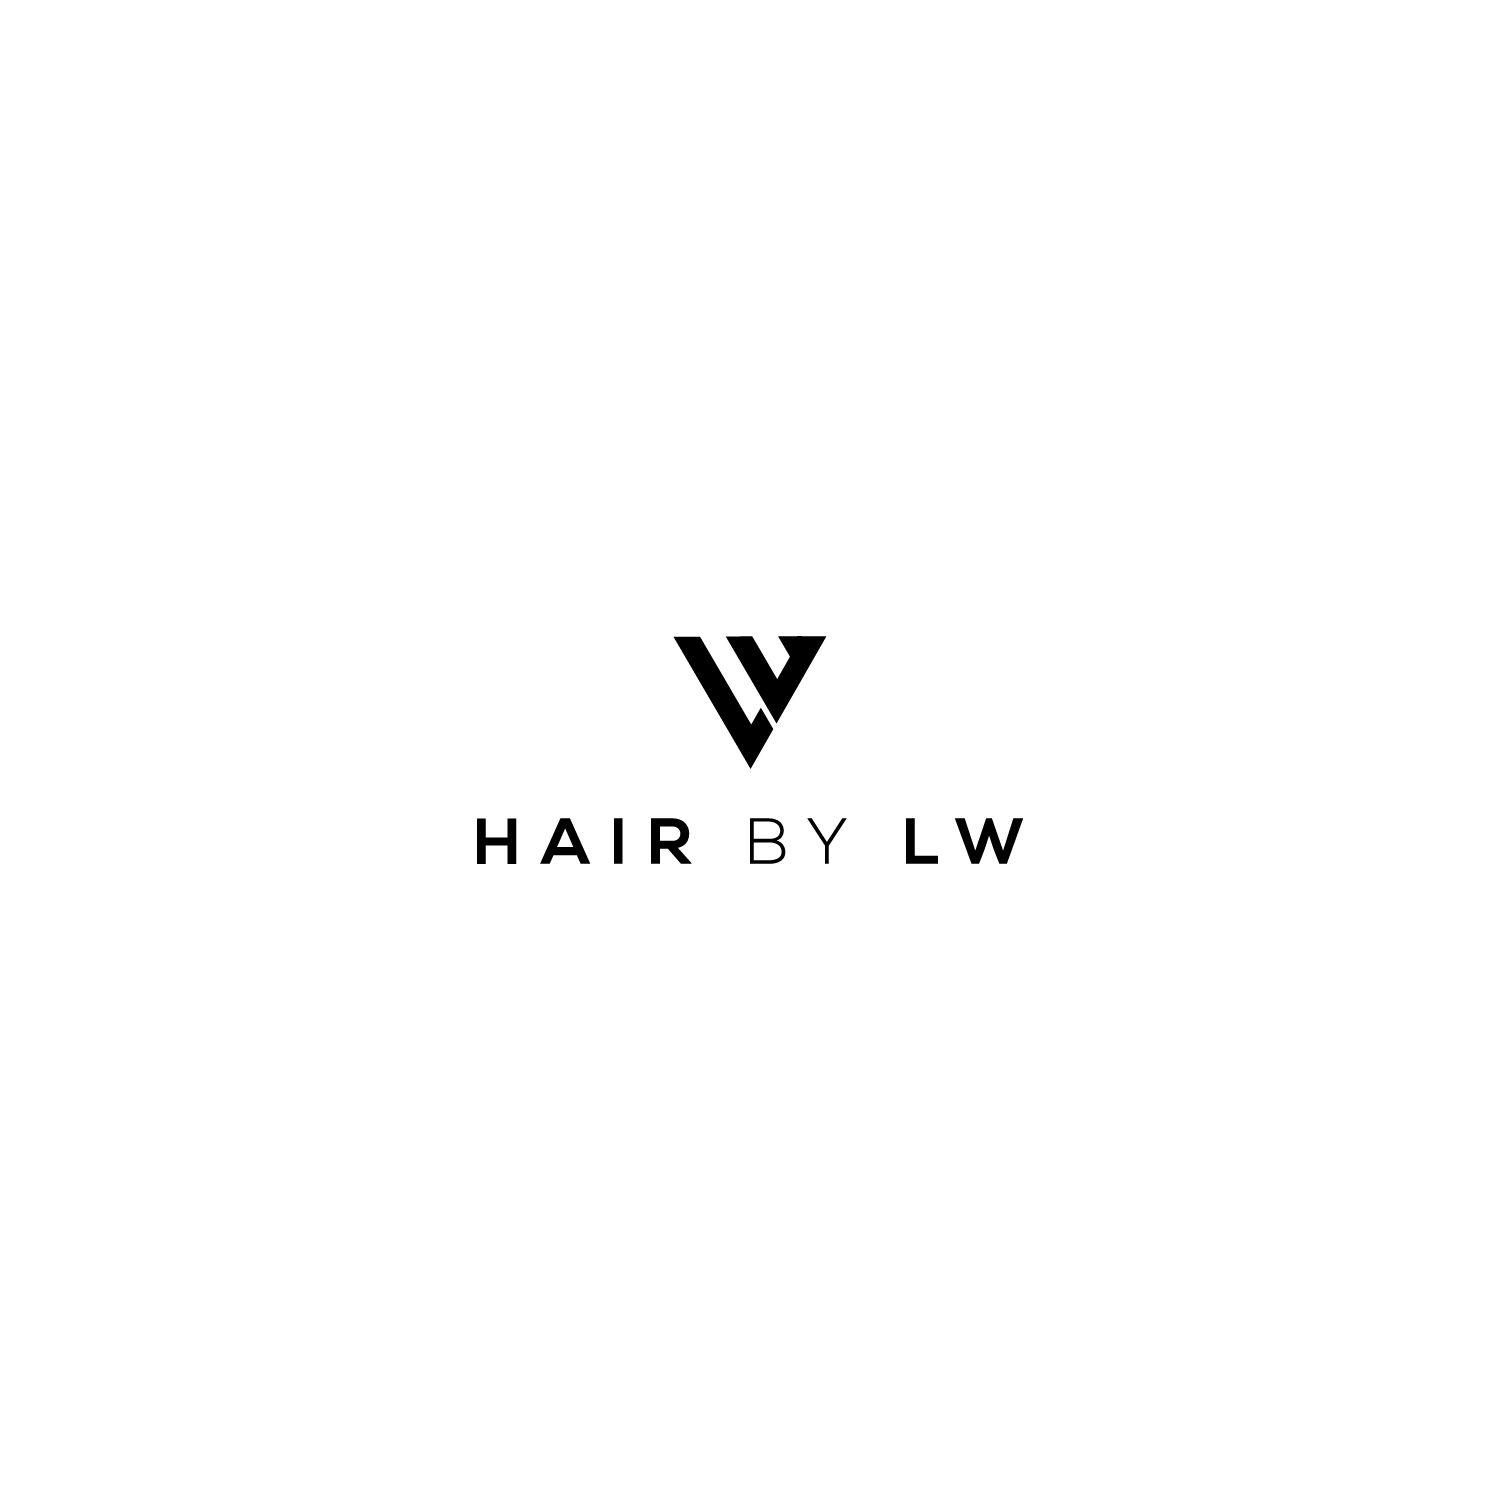 LW Logo - Business Logo Design for Hair by Lindsay Weflen Or Hair by LW by ...